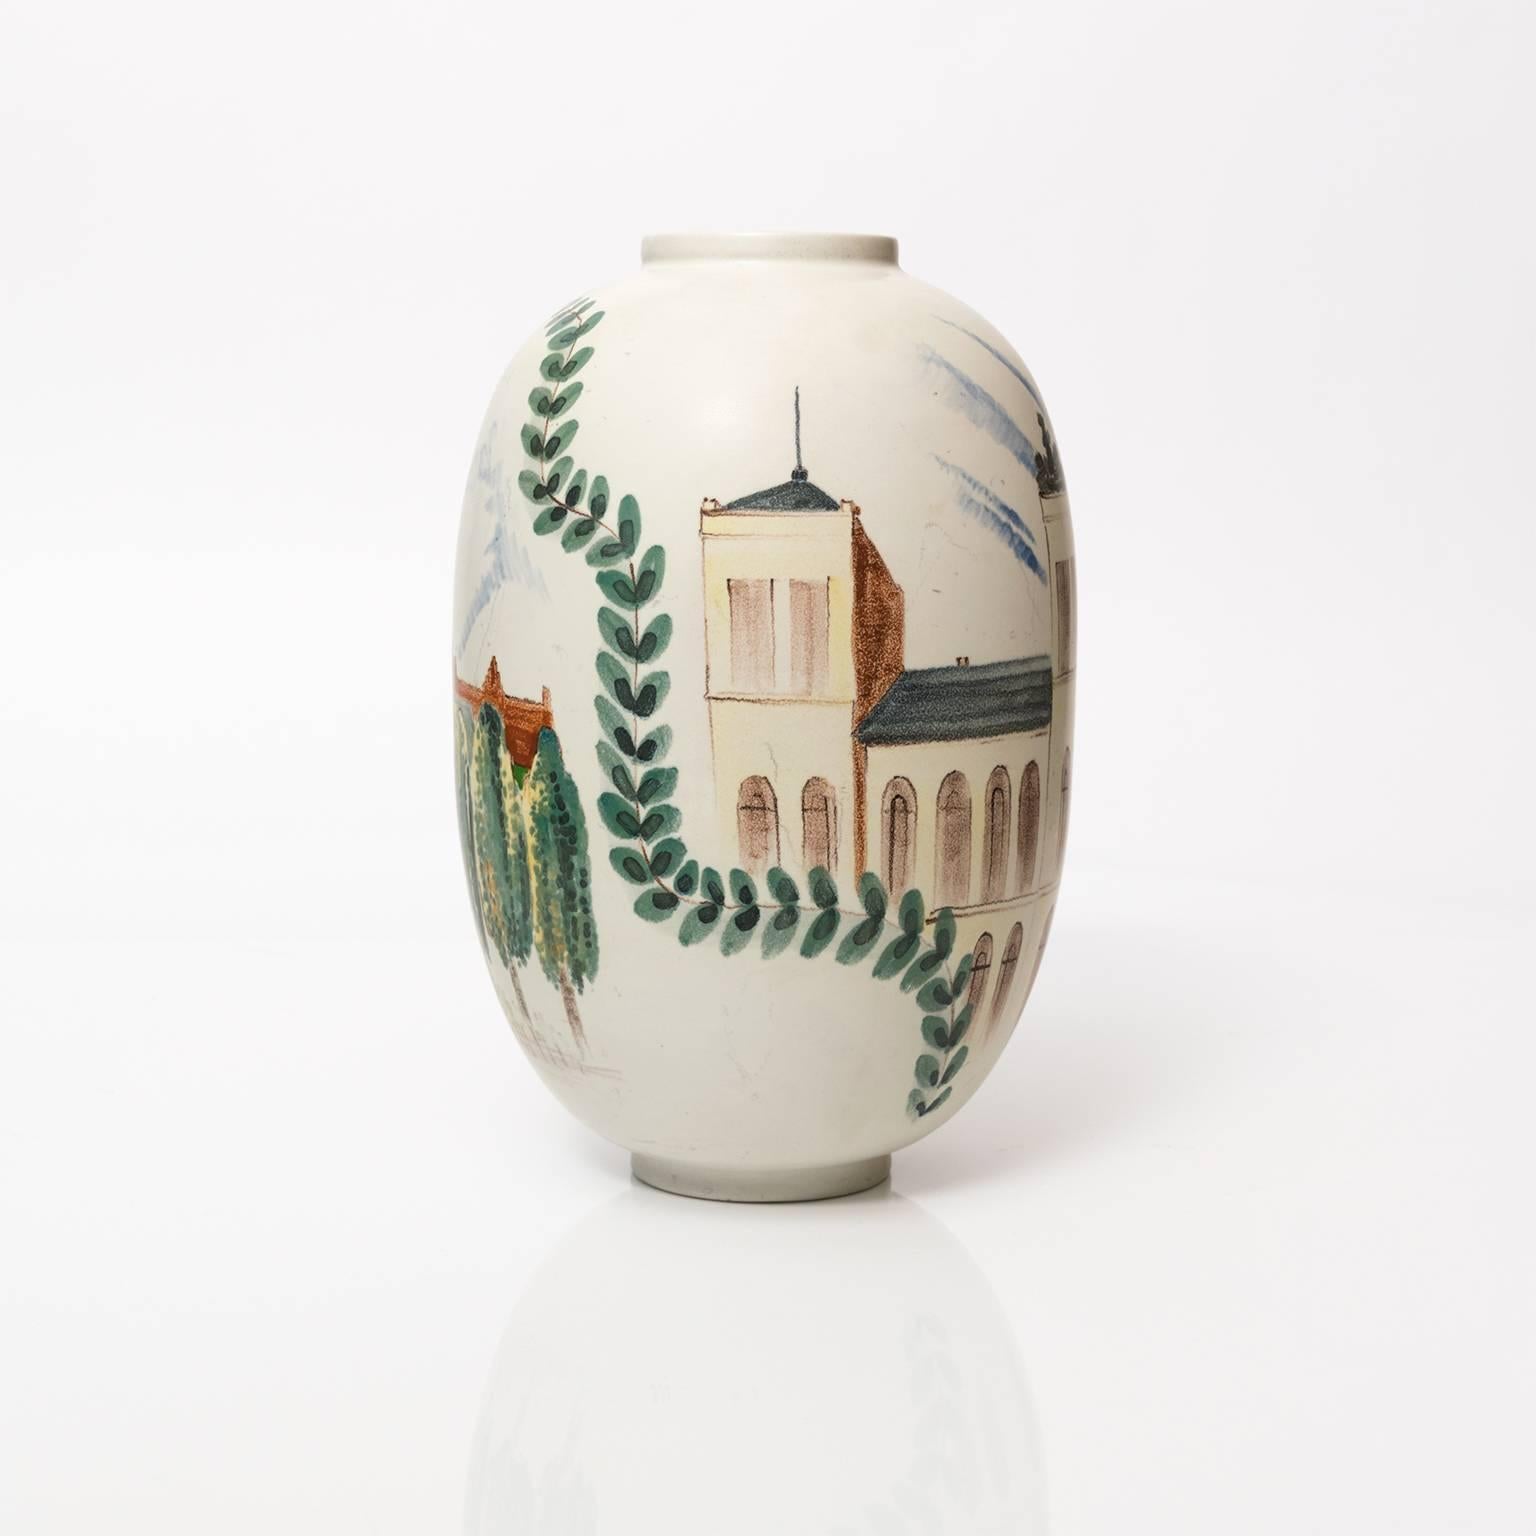 Large unique hand decorated cityscape "Lund" ceramic Scandinavian Modern vase by Oskar Dahl for Rorstrand. This vase is dated 1943.